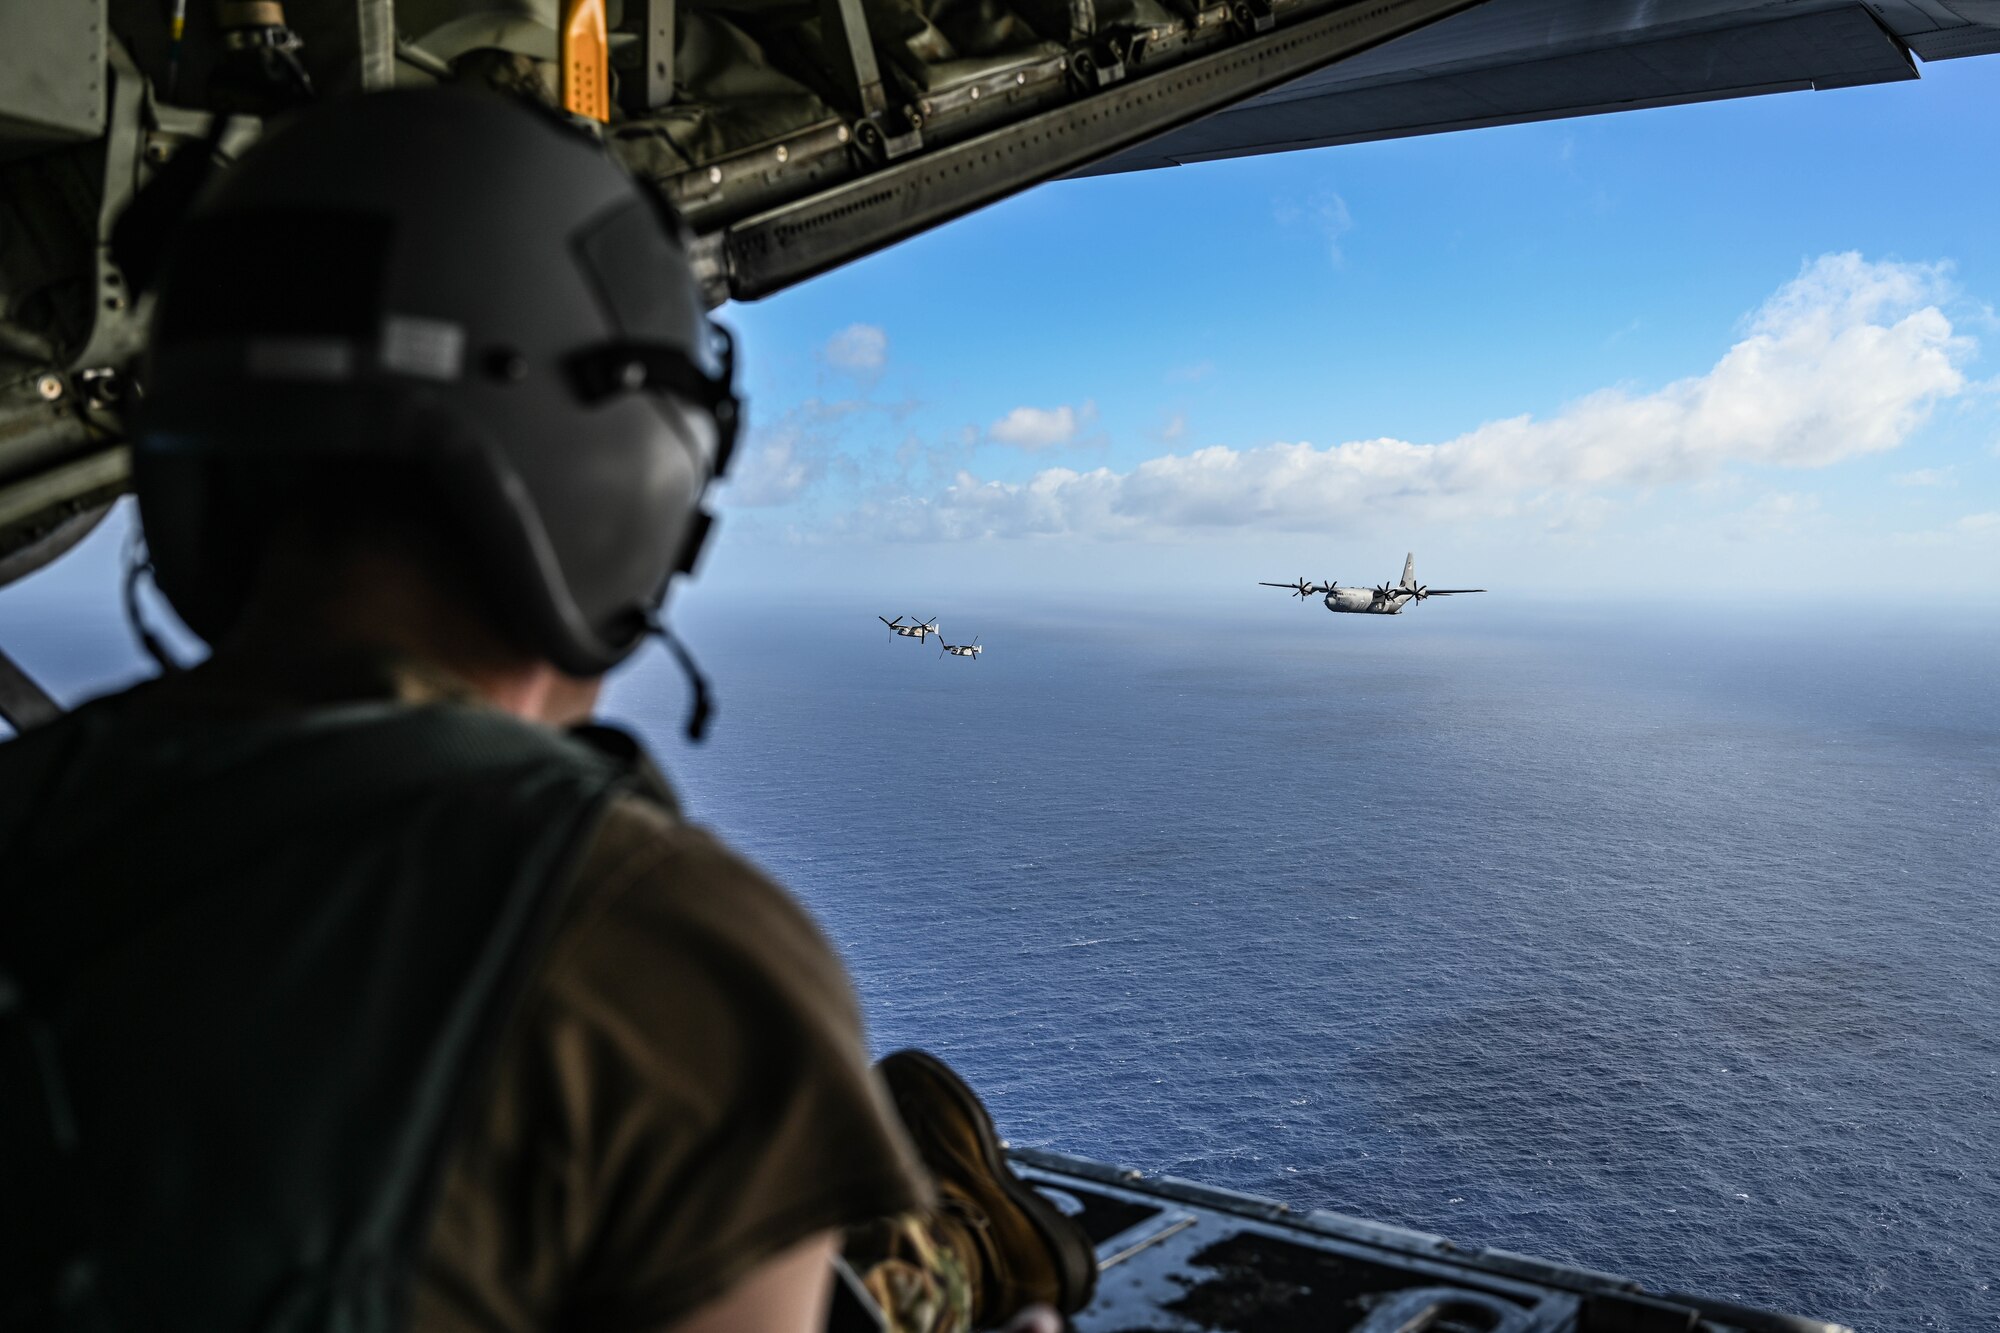 A man in uniform wearing a helmet watches military aircraft fly over the ocean